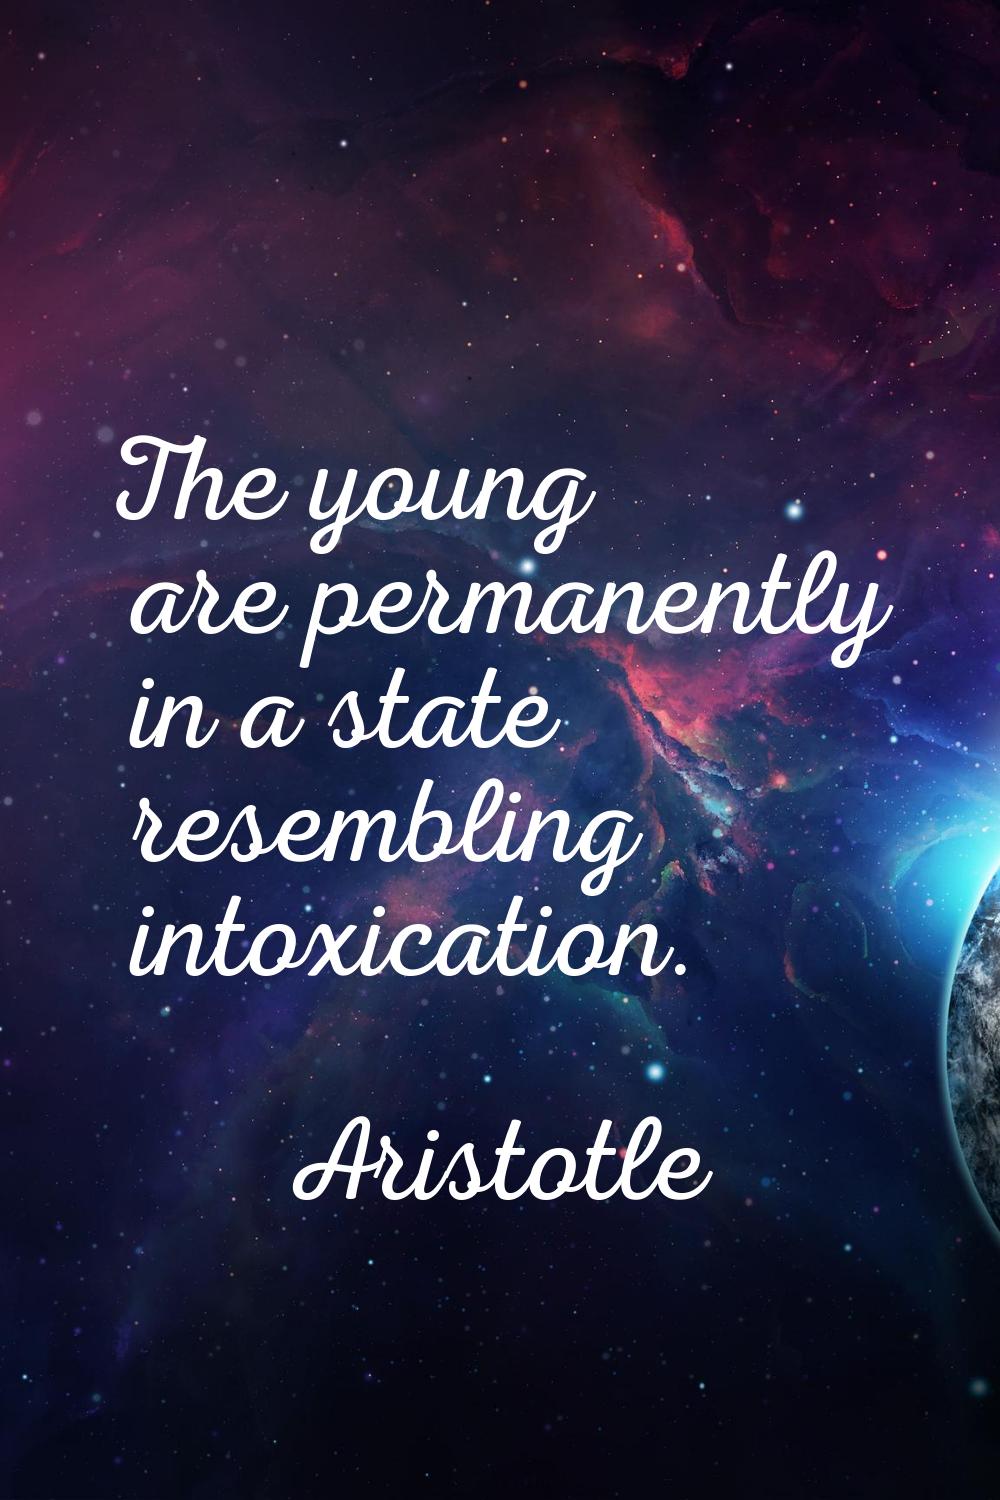 The young are permanently in a state resembling intoxication.